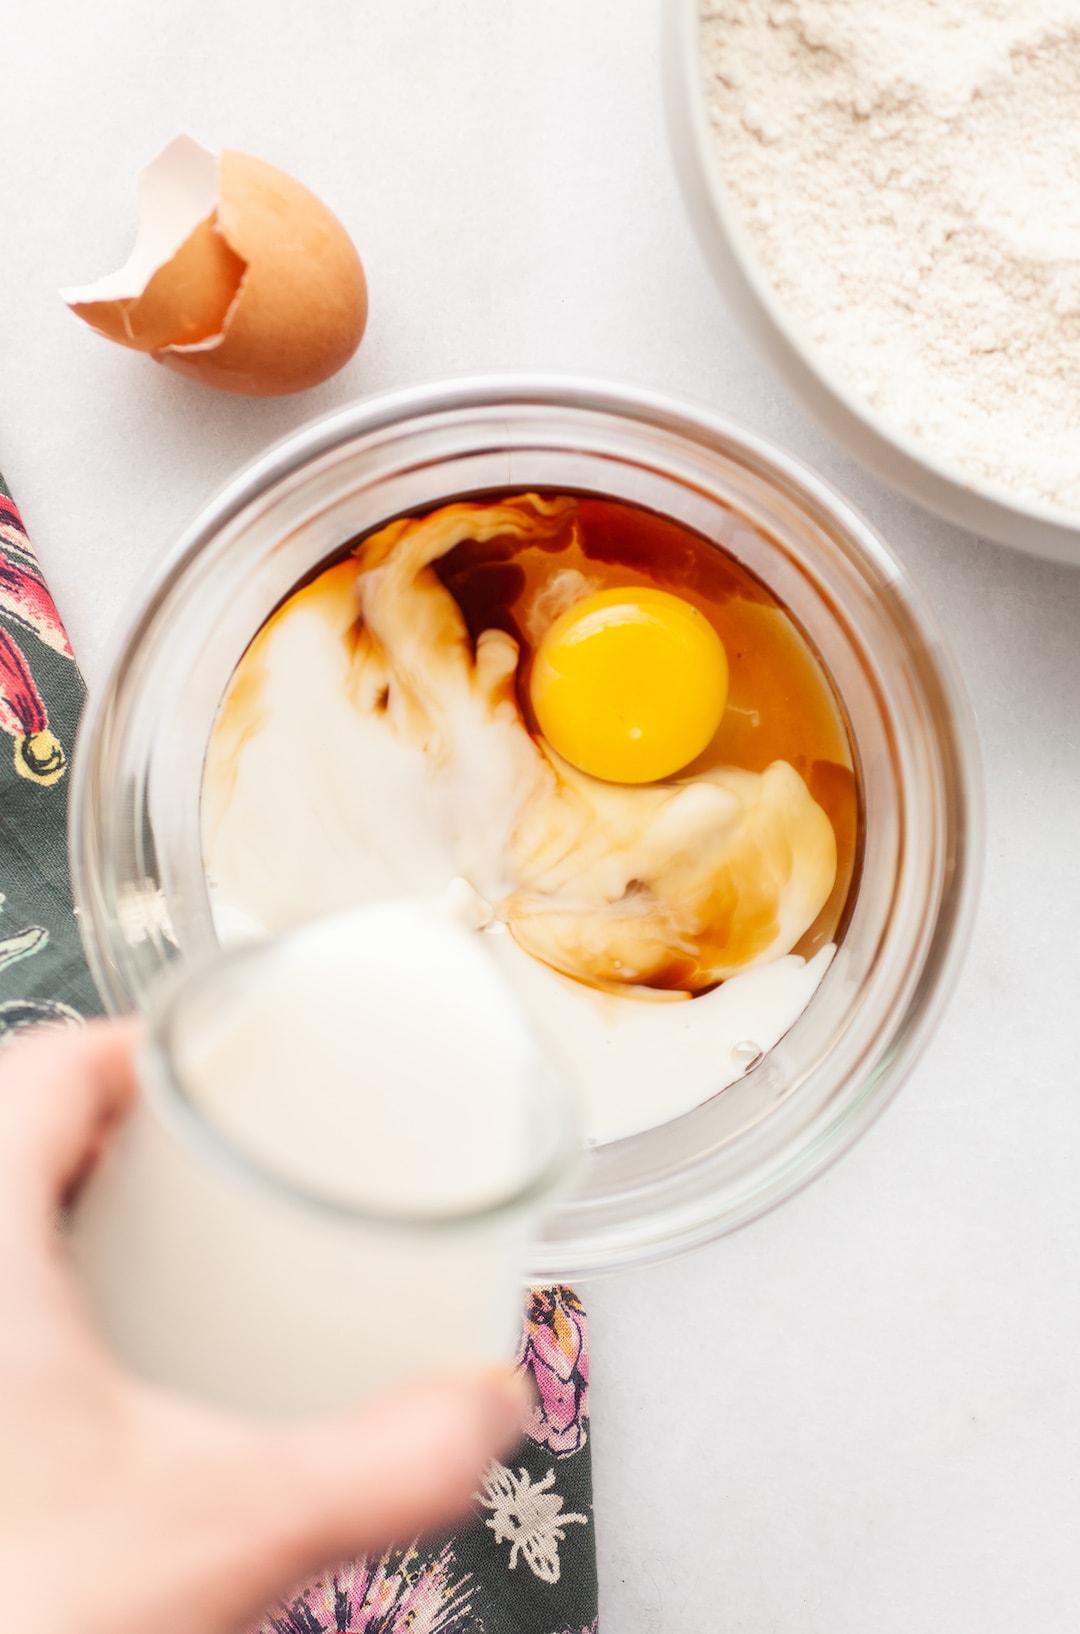 image of a glass bowl with an egg and maple syrup and almond milk being poured in